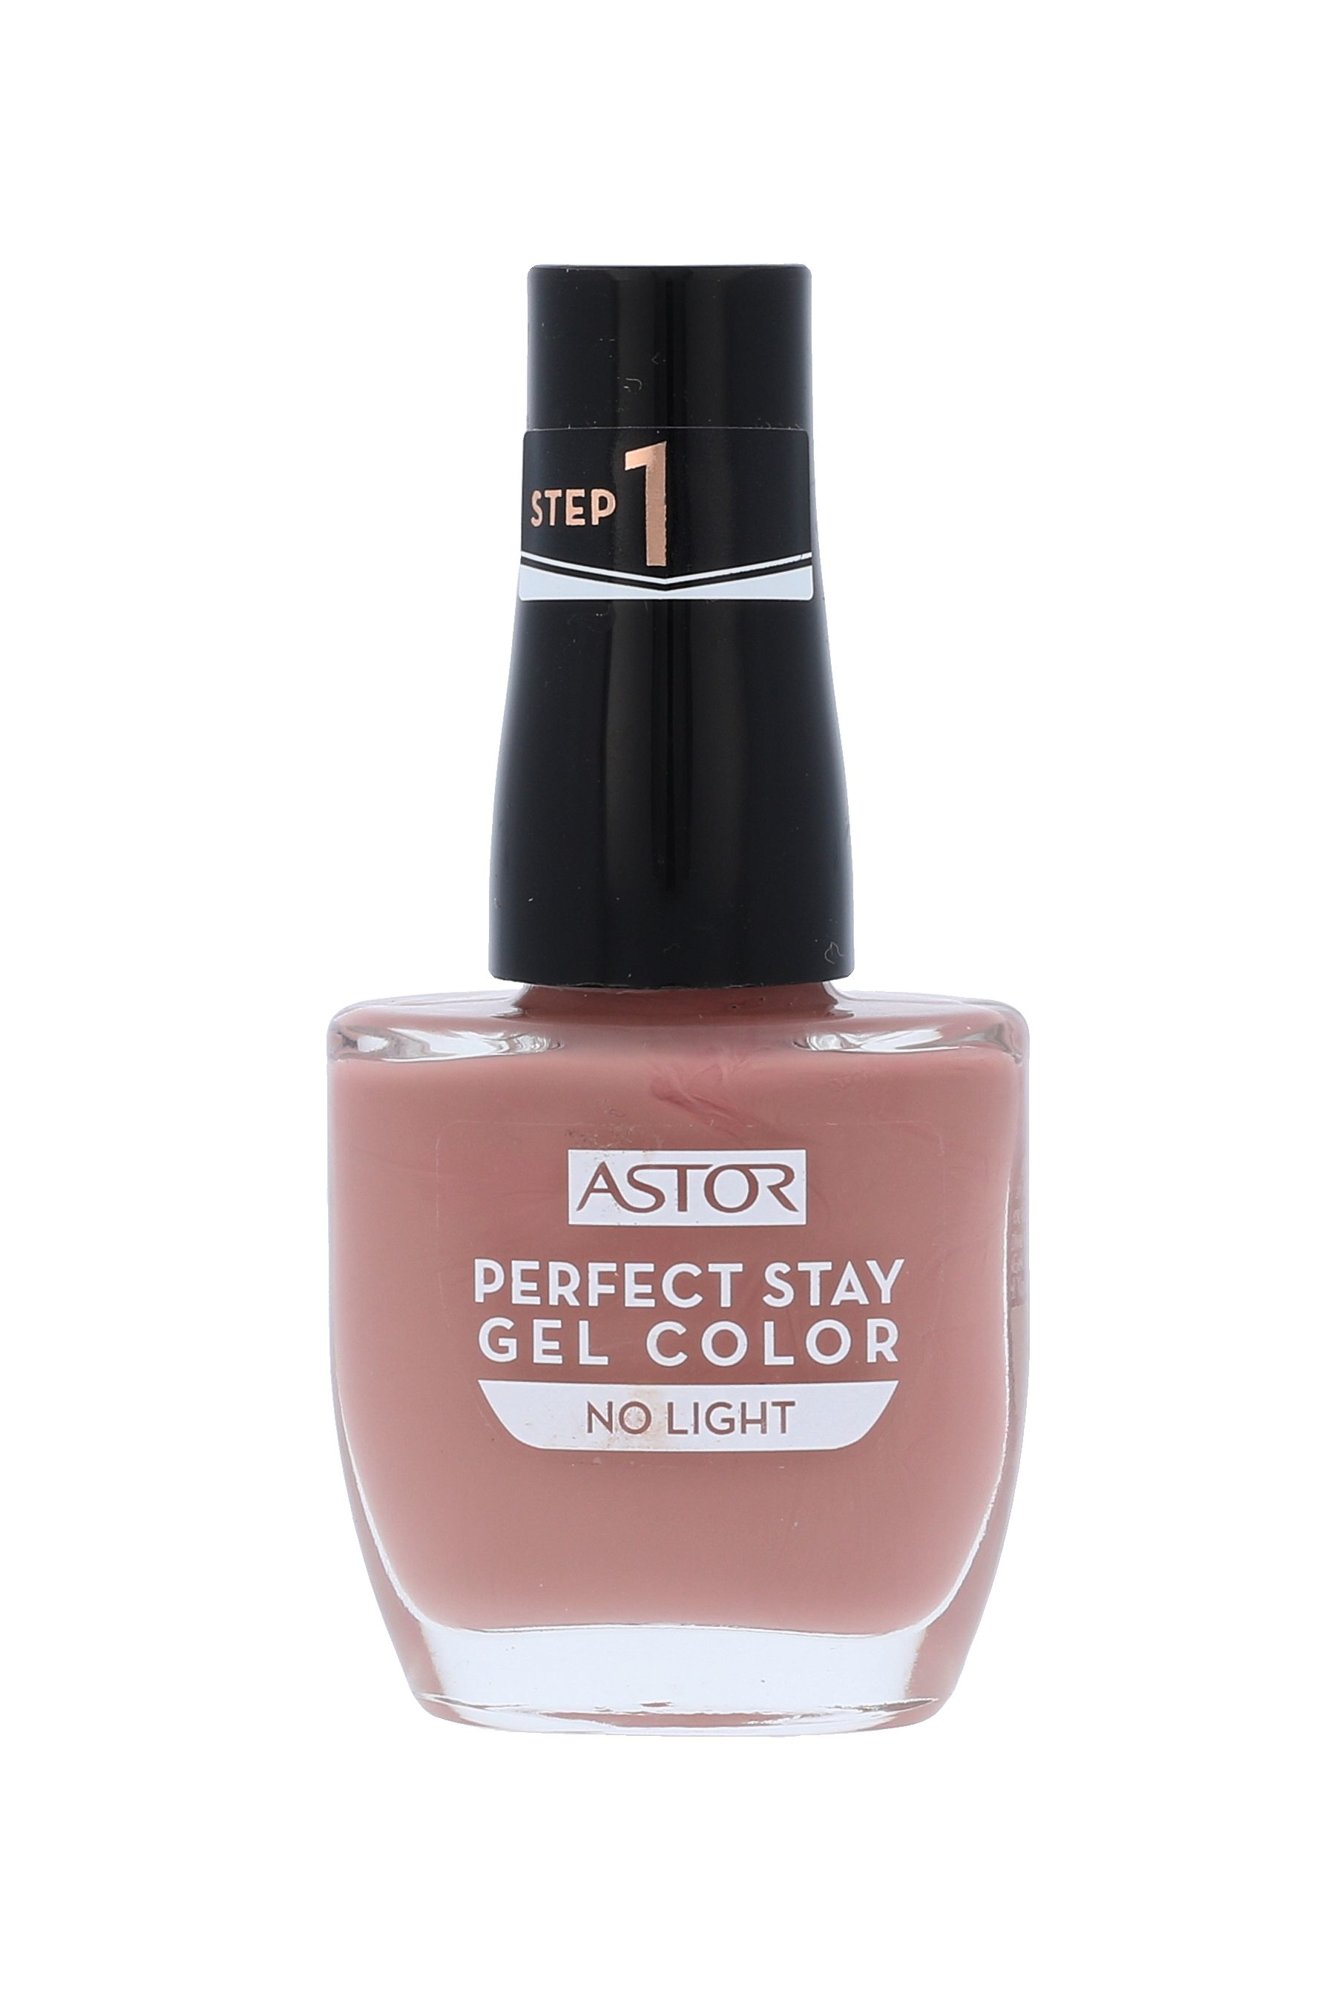 Astor Perfect Stay Gel Color